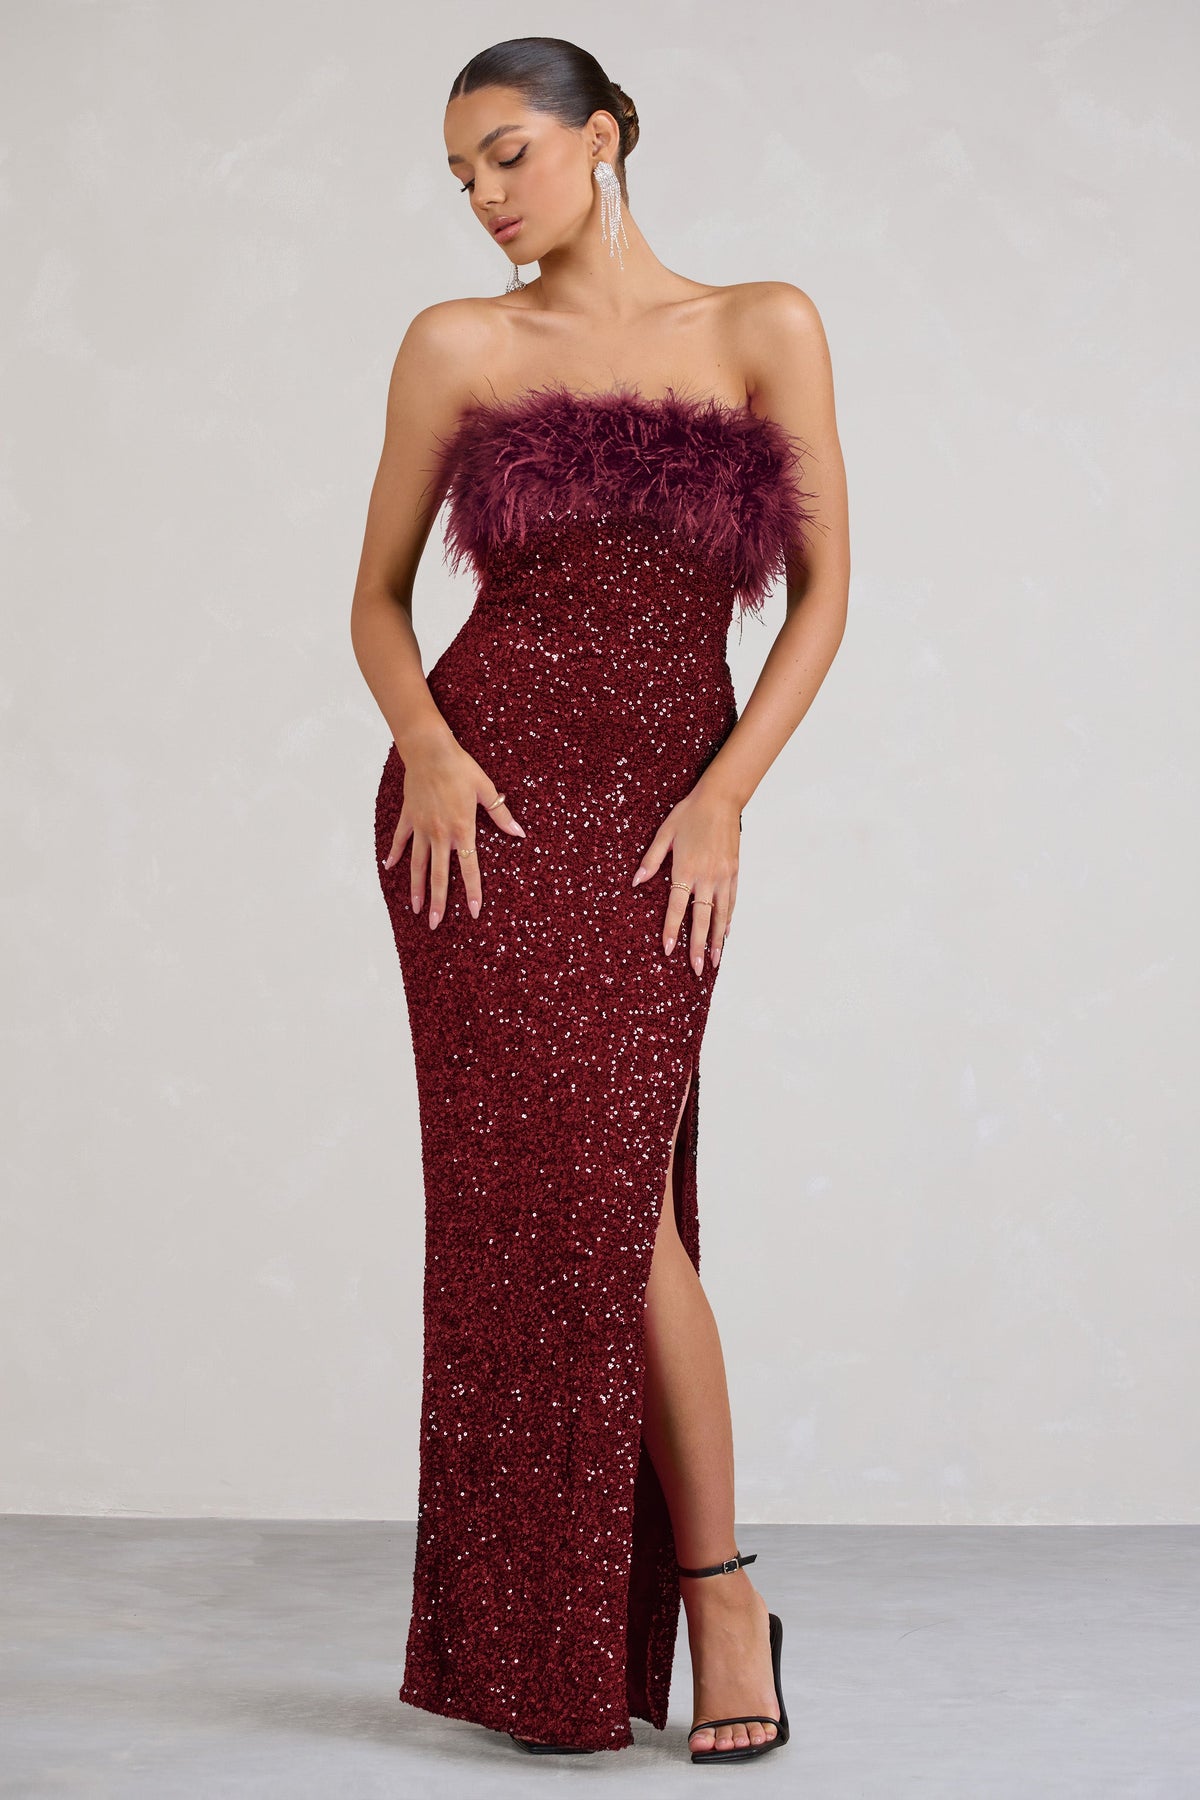 Sequin Maxi Dress by GOOD AMERICAN for $50